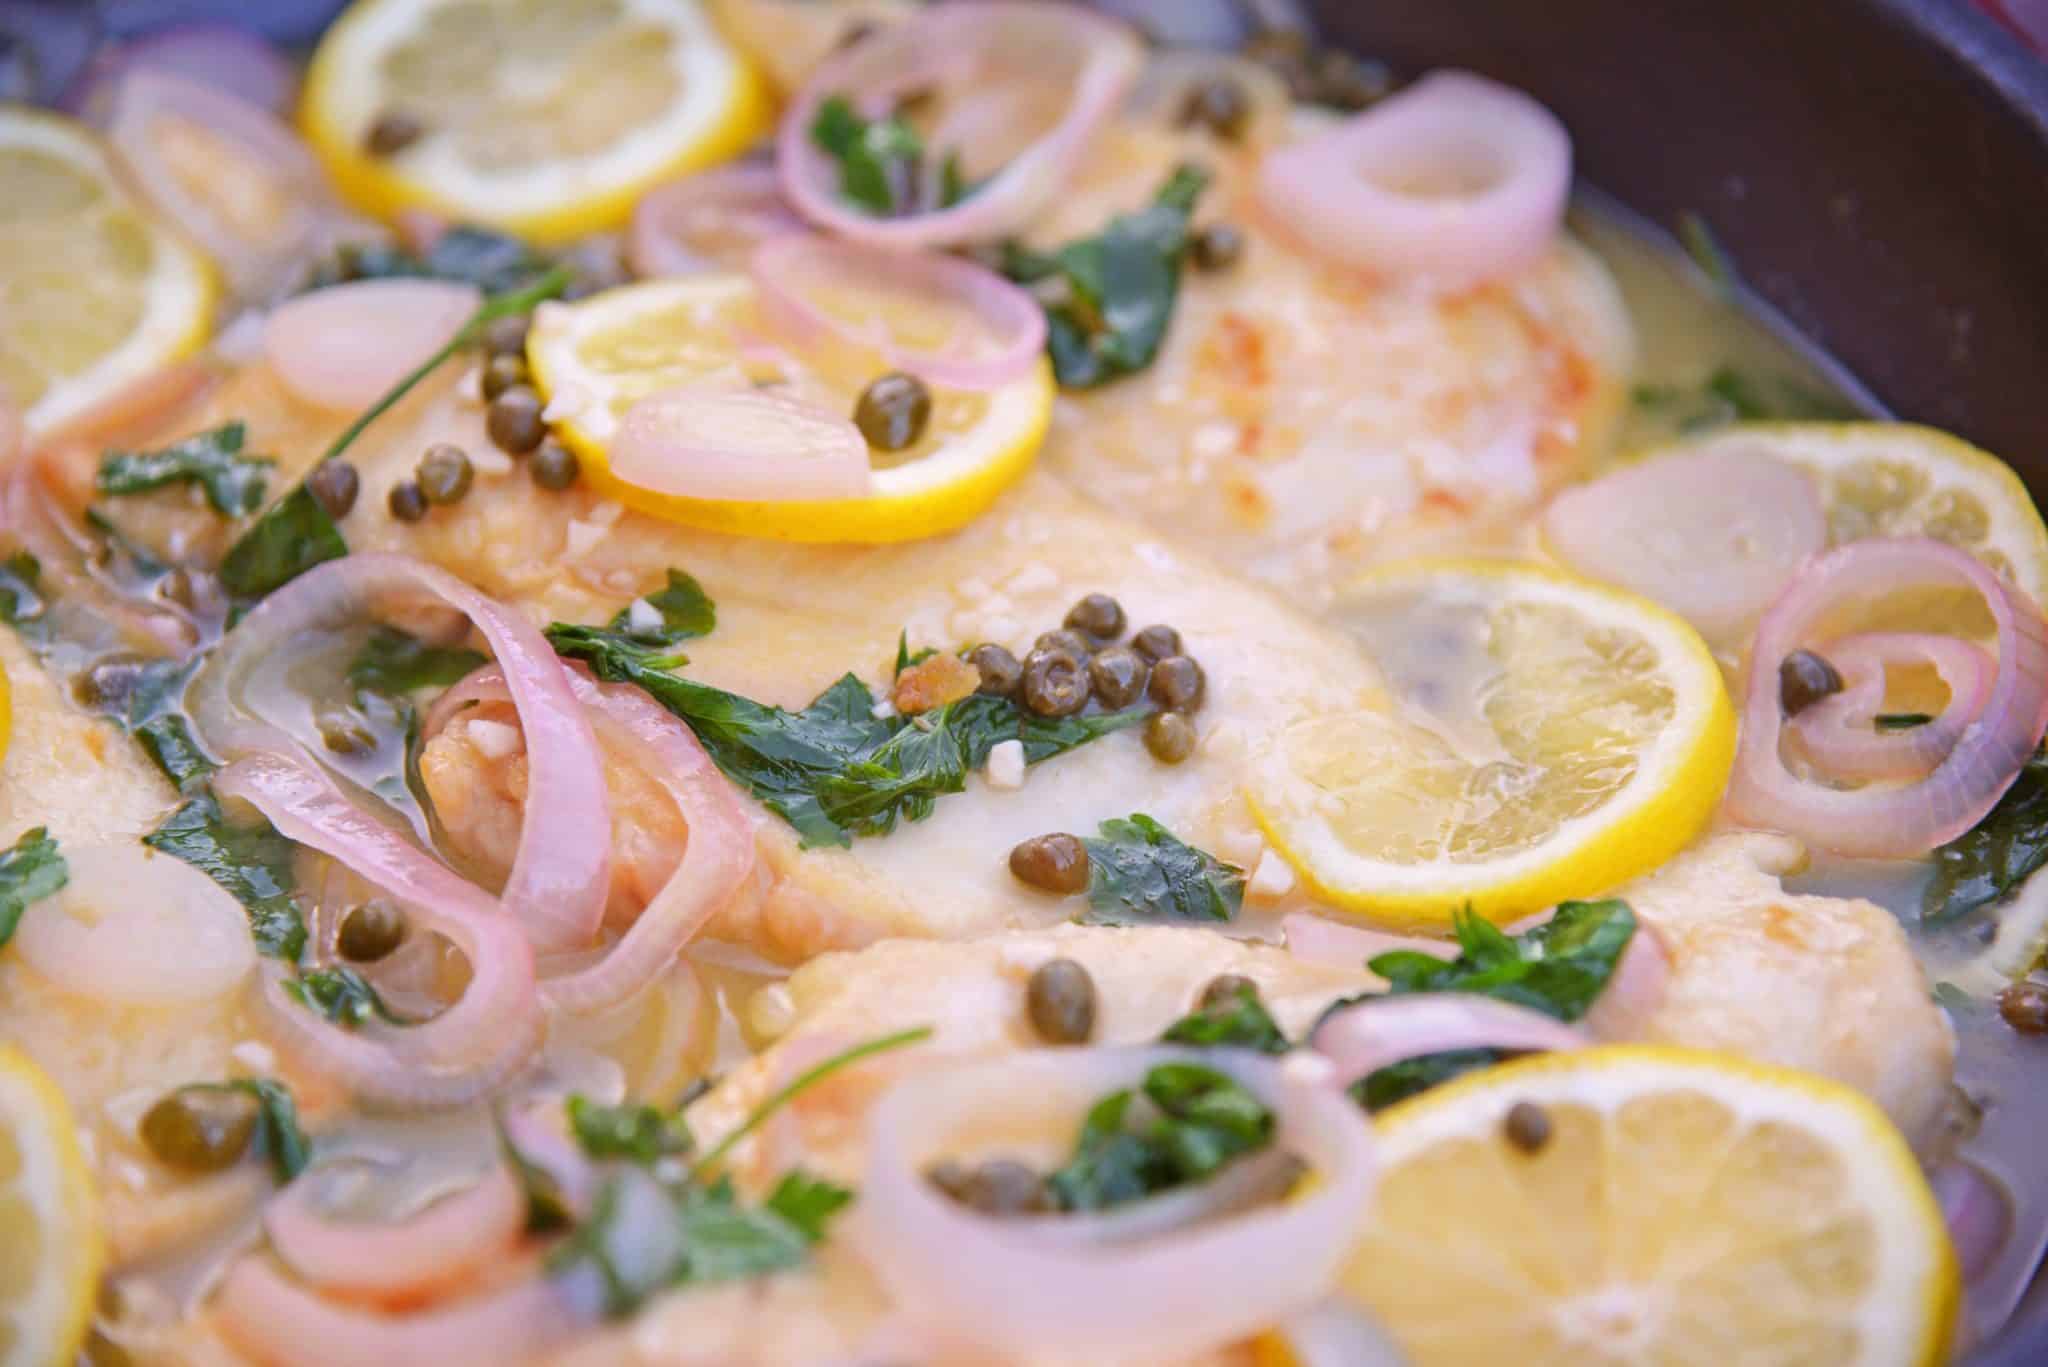 Classic Chicken Piccata is an easy Italian recipe that comes together in less than 3o minutes and explodes with flavors of lemon, caper and shallot. Delicious!  #chickenpiccata #easyitalianrecipes www.savoryexperiments.com 